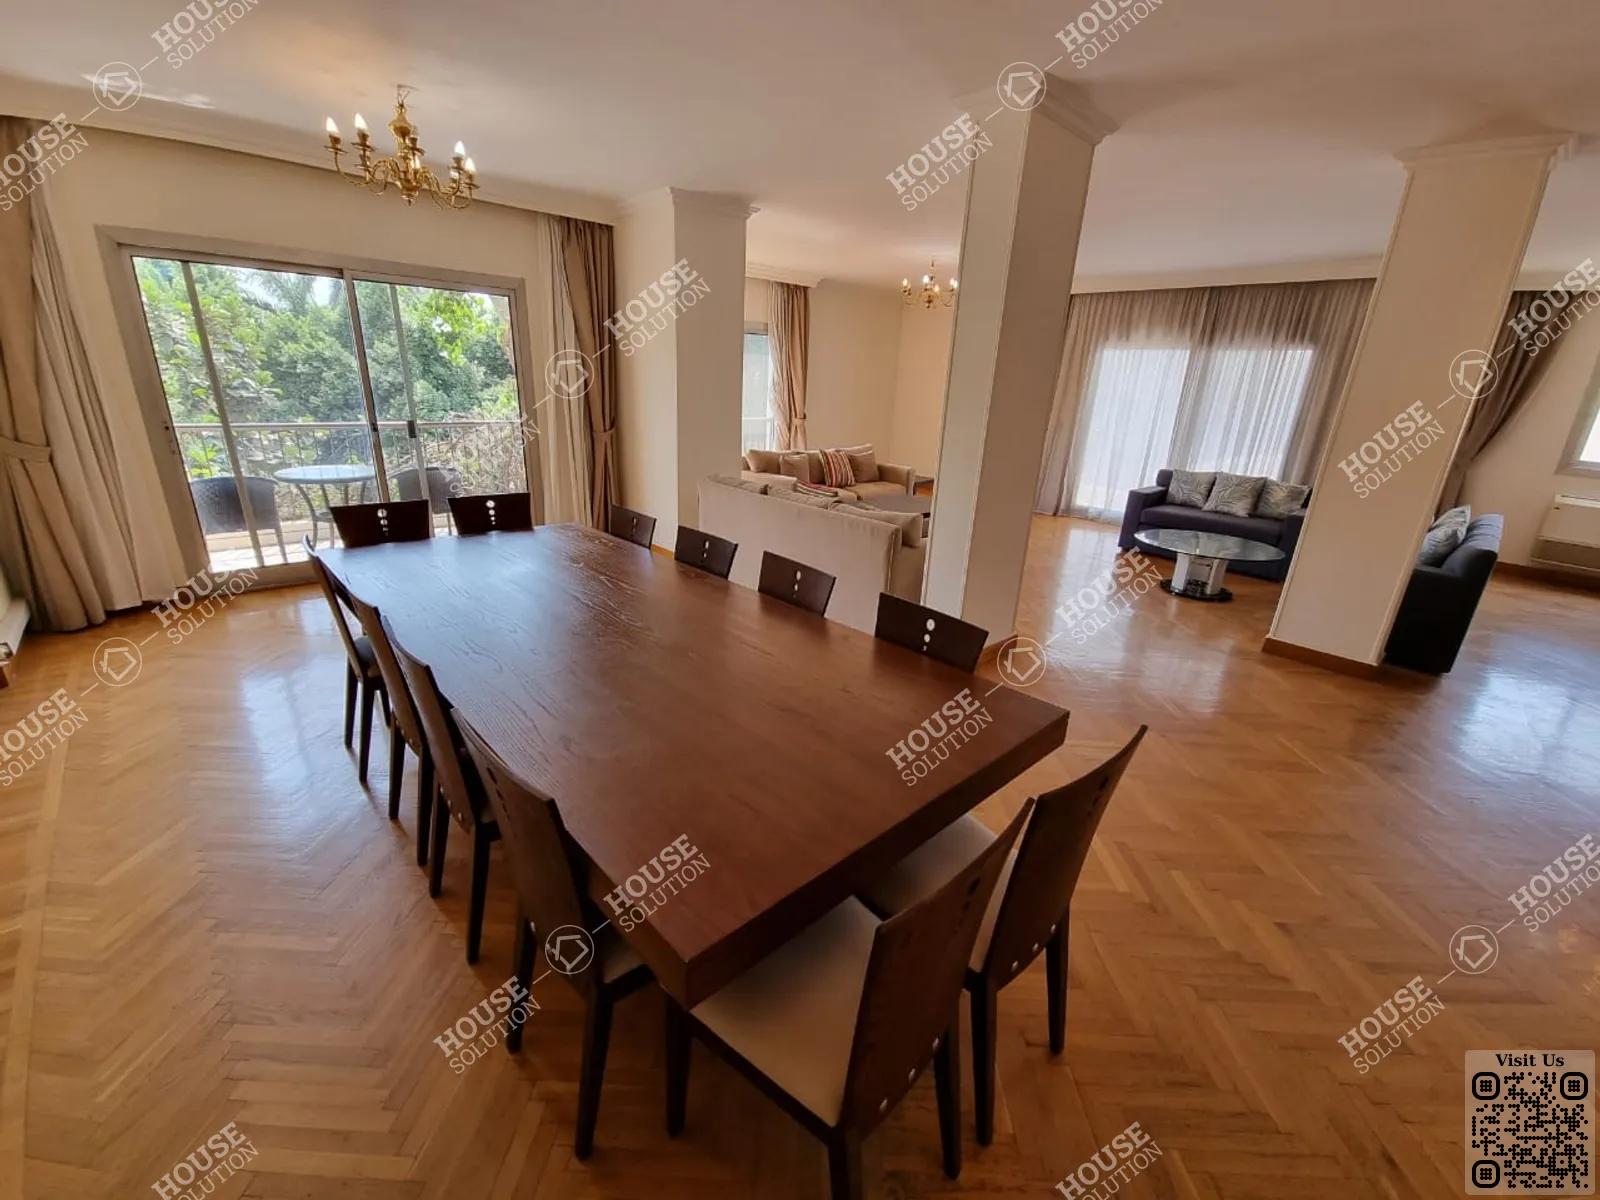 DINING AREA @ Apartments For Rent In Maadi Maadi Sarayat Area: 300 m² consists of 4 Bedrooms 3 Bathrooms Furnished 5 stars #3404-1